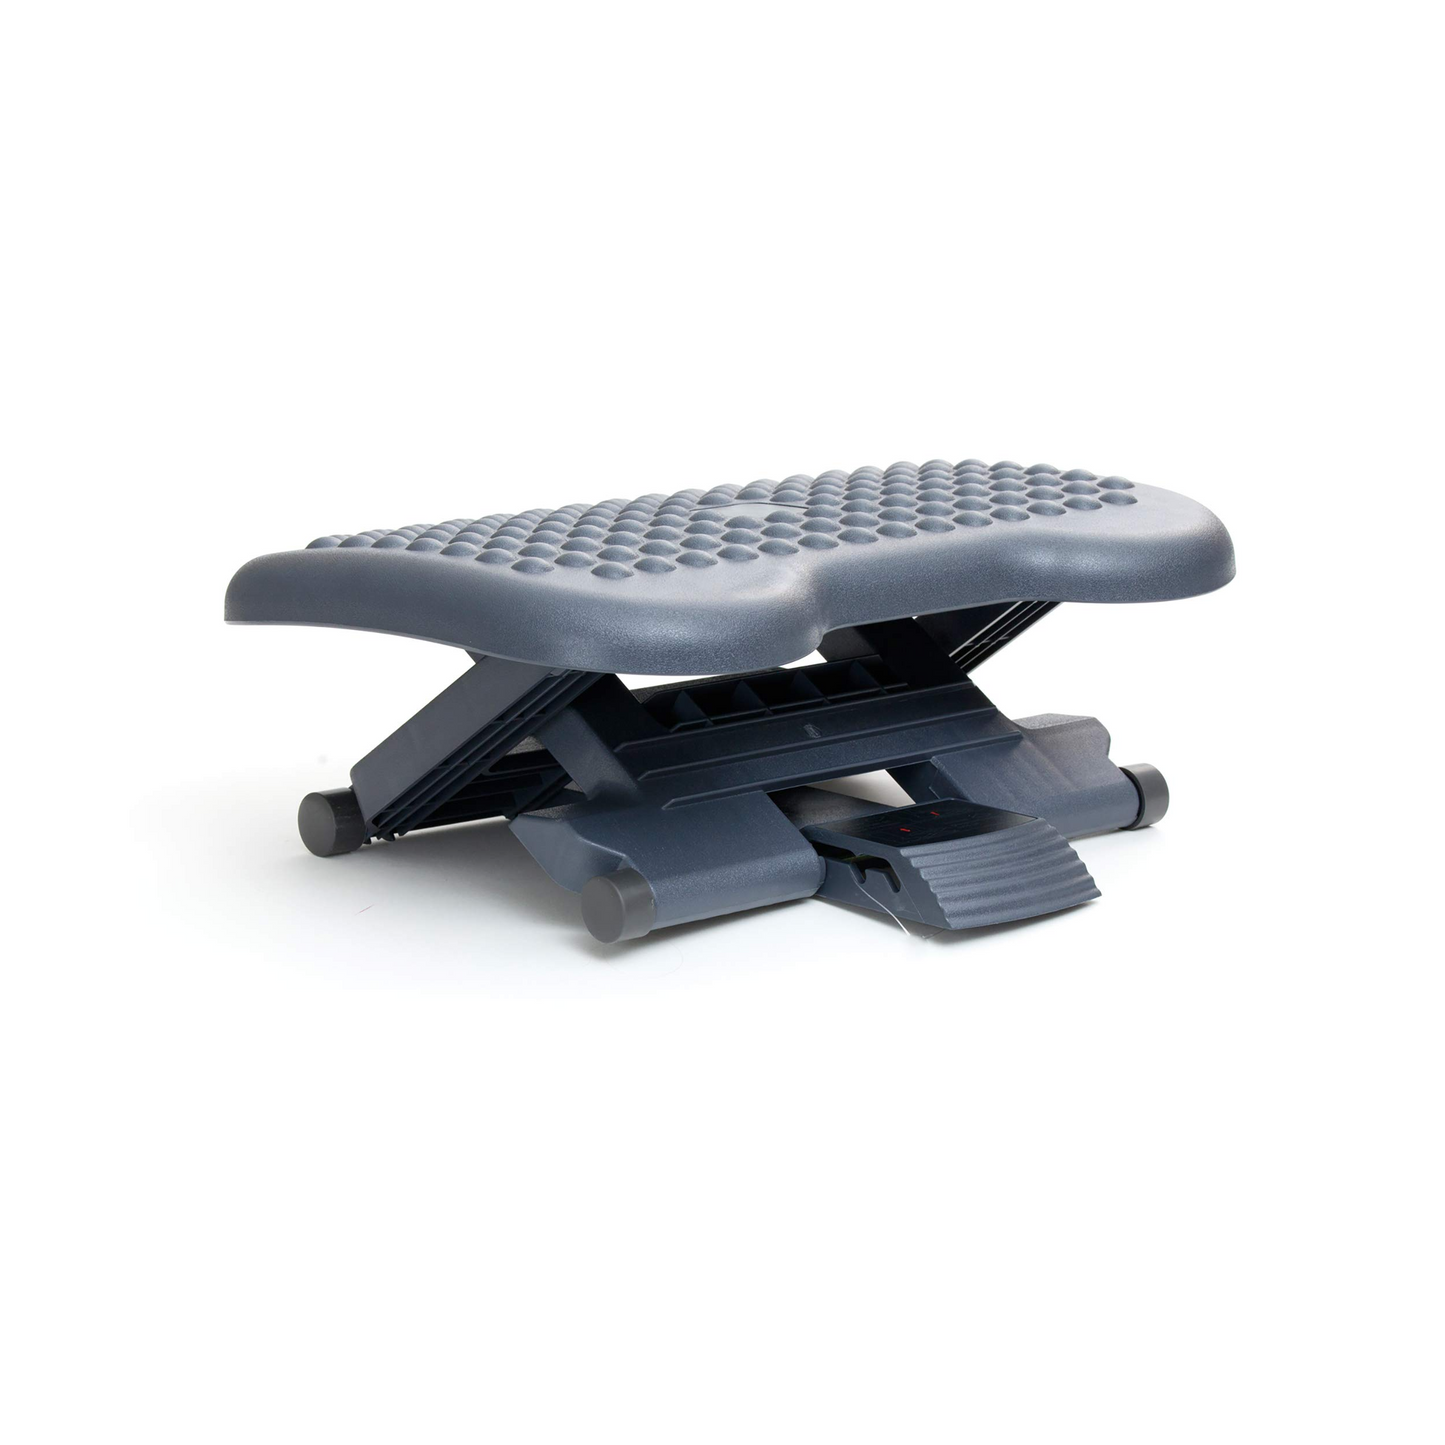 LEGUP-BLK Rest, Ergonomic Foot, Pressure Relief for Comfort, Back, and Body